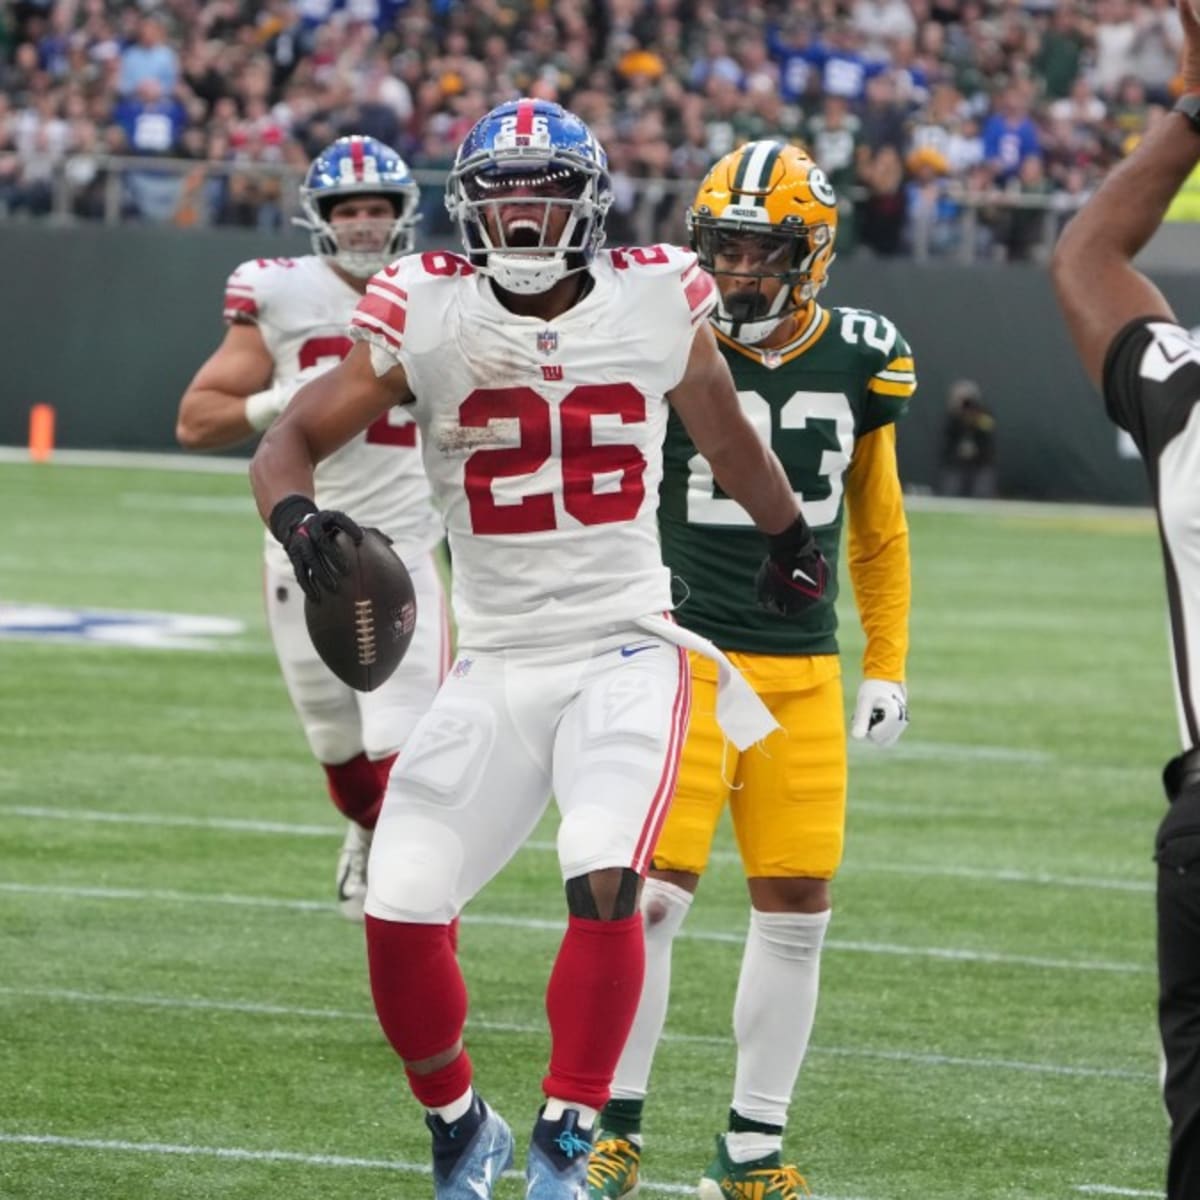 New York Giants-Green Bay Packers Halftime Report: Packers Up 20-10 in  London Game - Sports Illustrated New York Giants News, Analysis and More